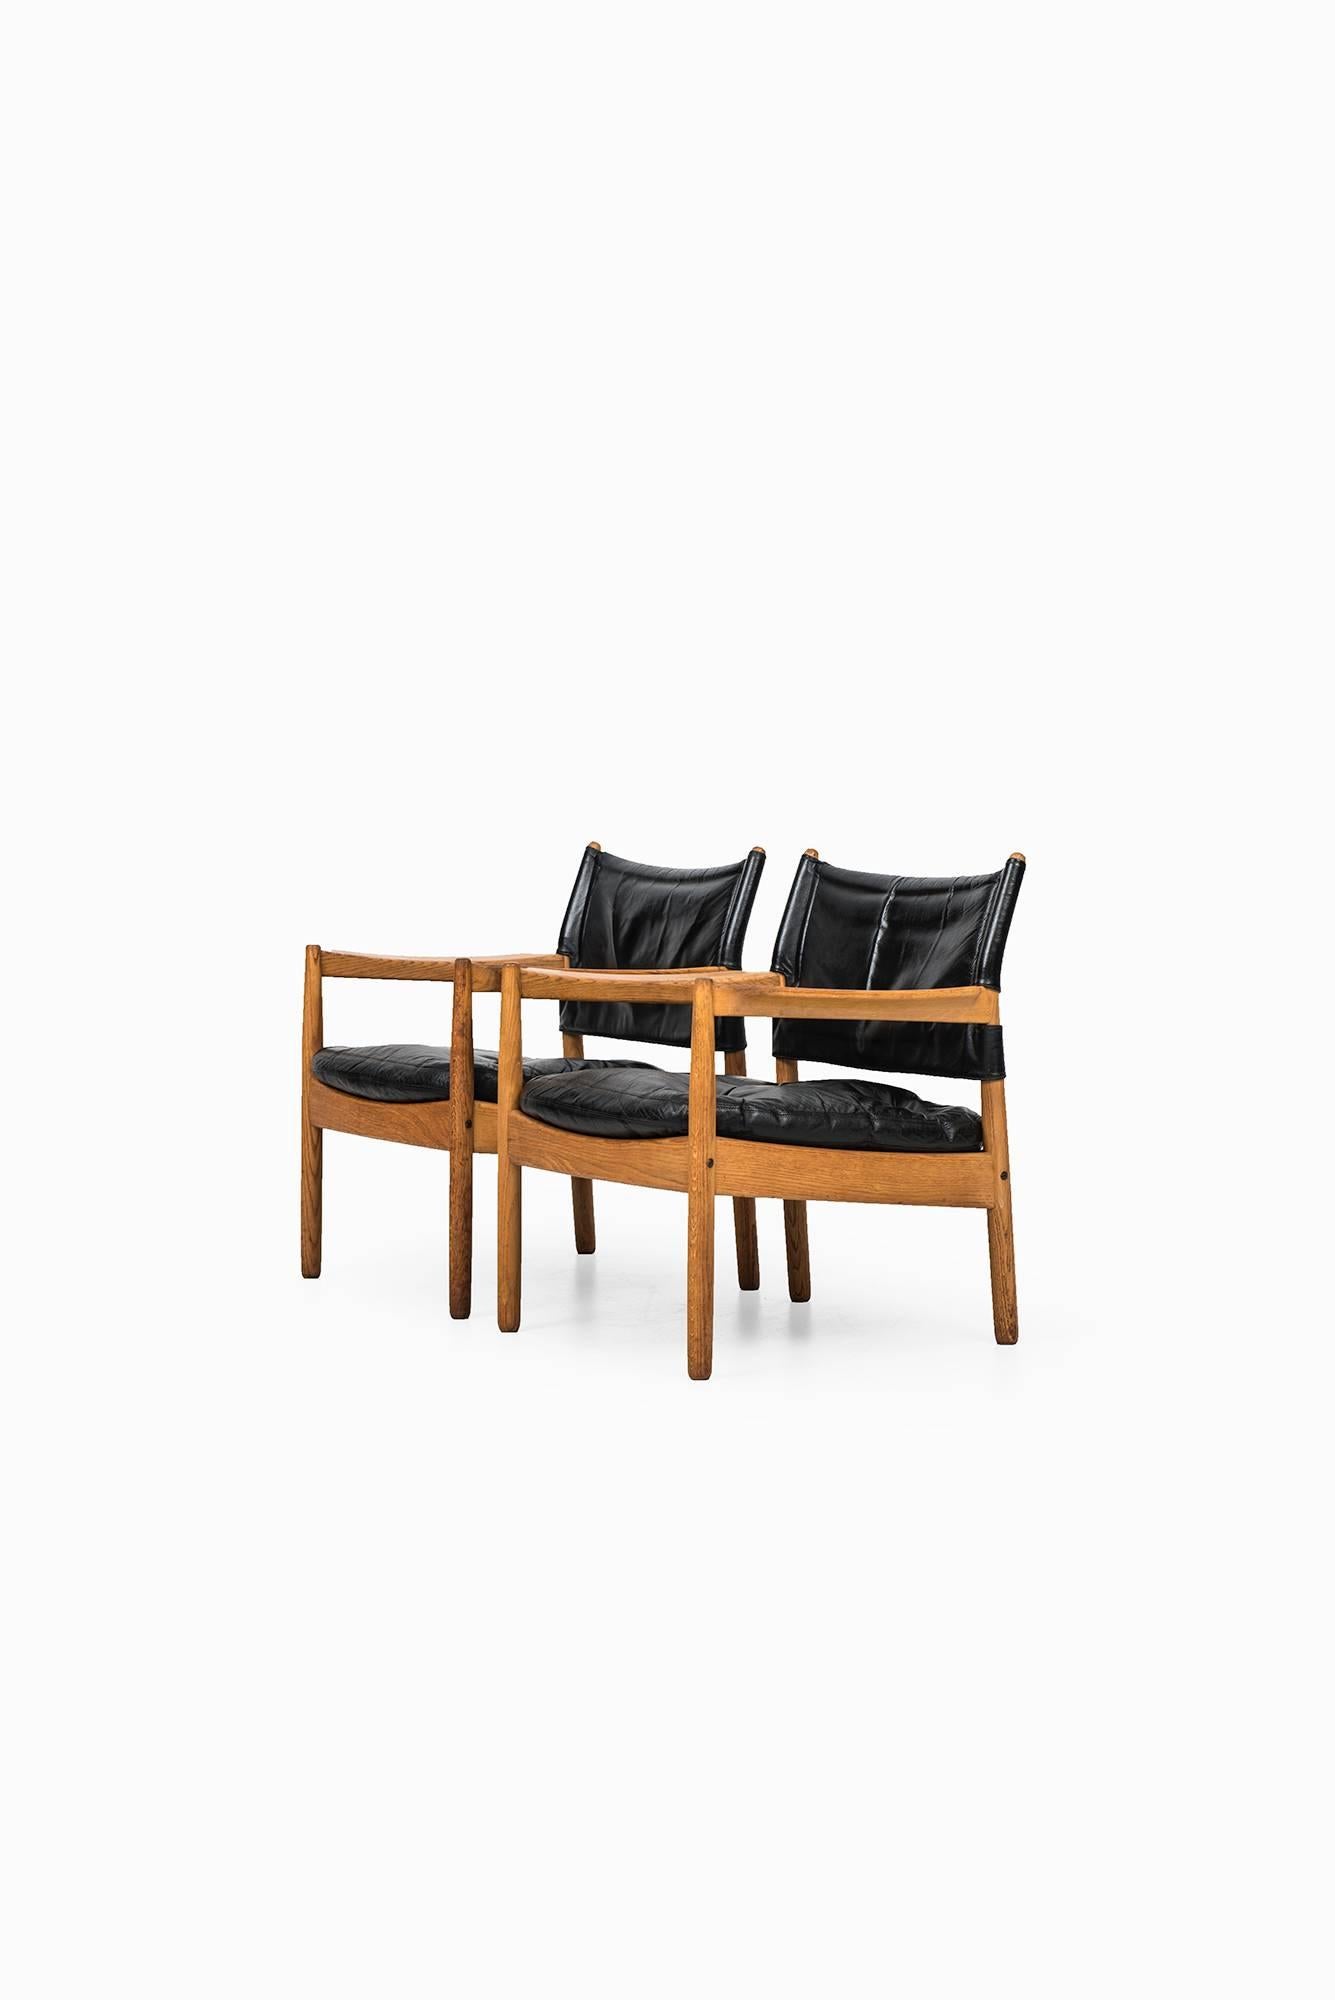 A pair of easy chairs designed by Gunnar Myrstrand. Produced by Källemo in Sweden.